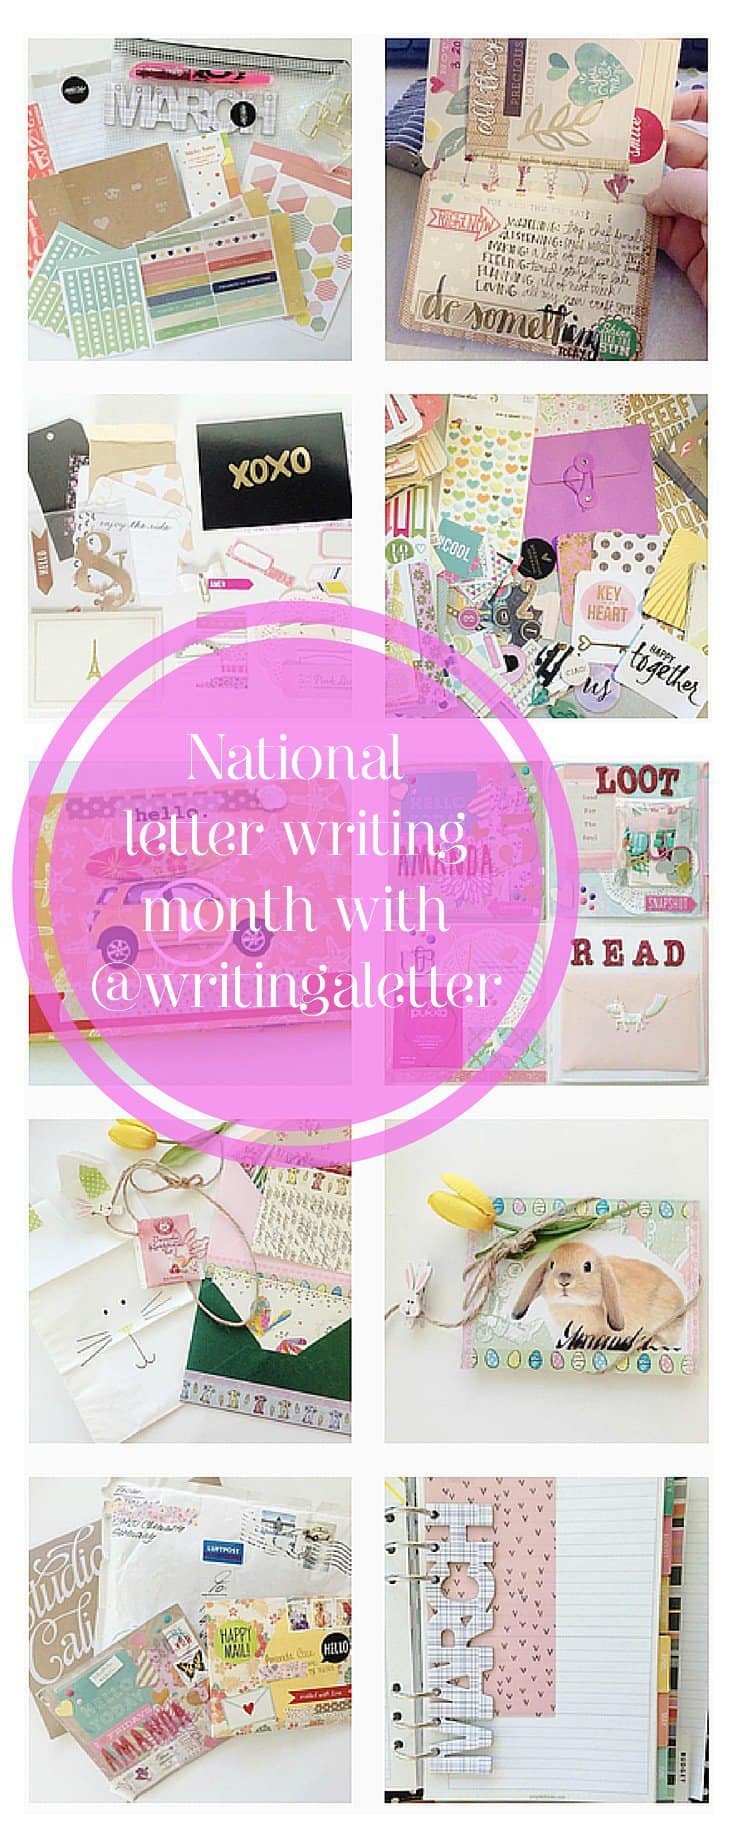 National letter writing month